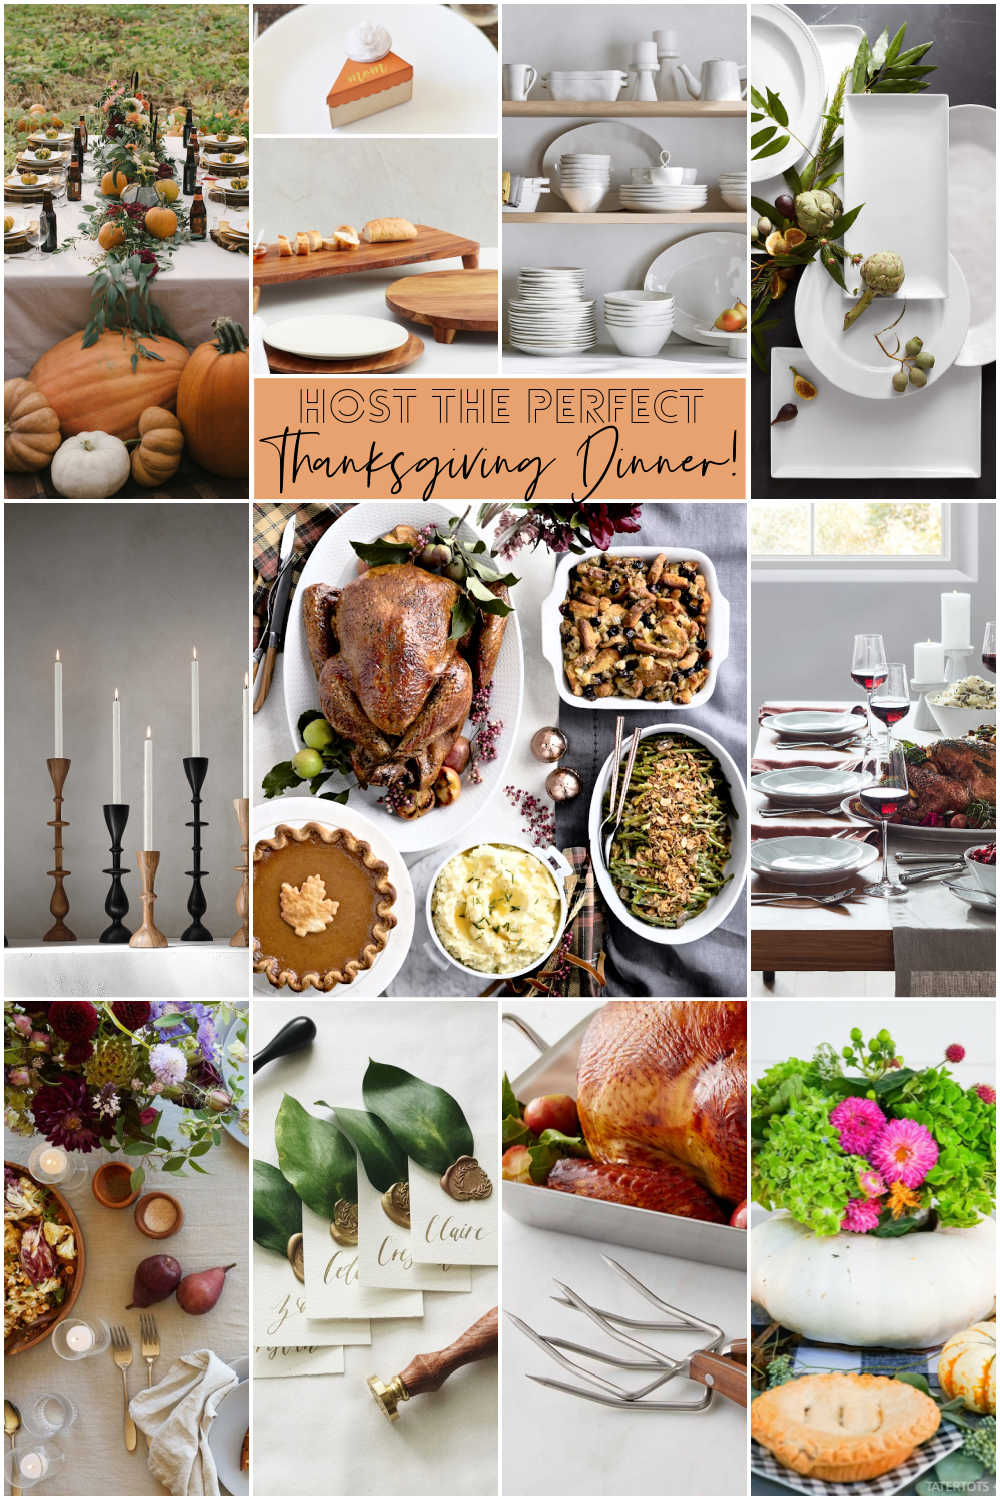 Host the Perfect Thanksgiving Dinner! Hosting Thanksgiving this year? Here are some ways to make it the most memorable event! 